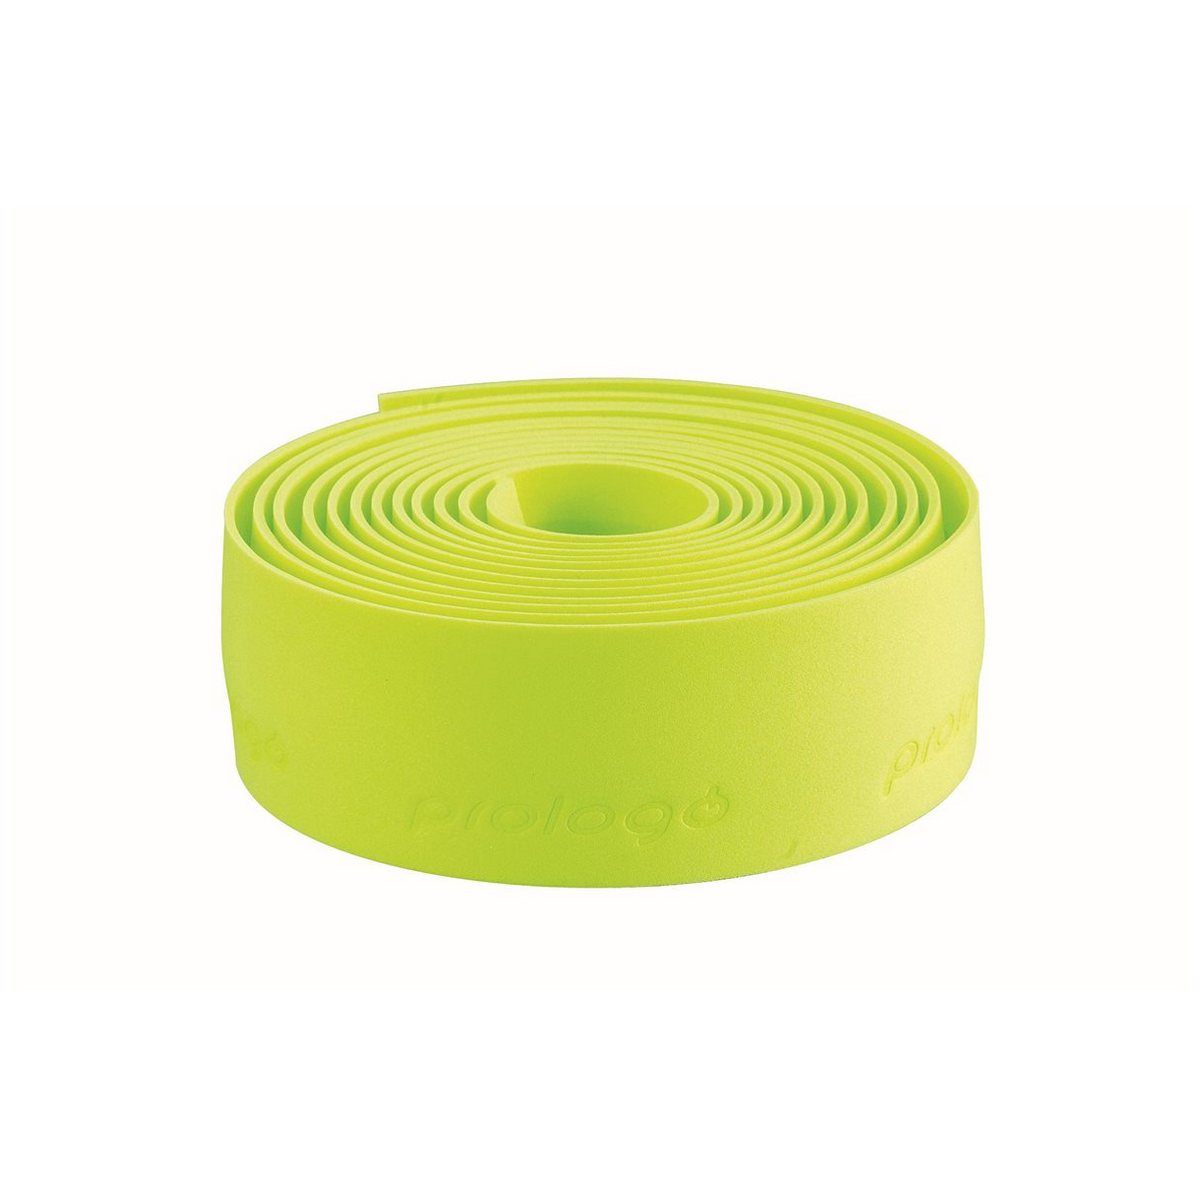 Handlebar tapes PLAINTOUCH yellow